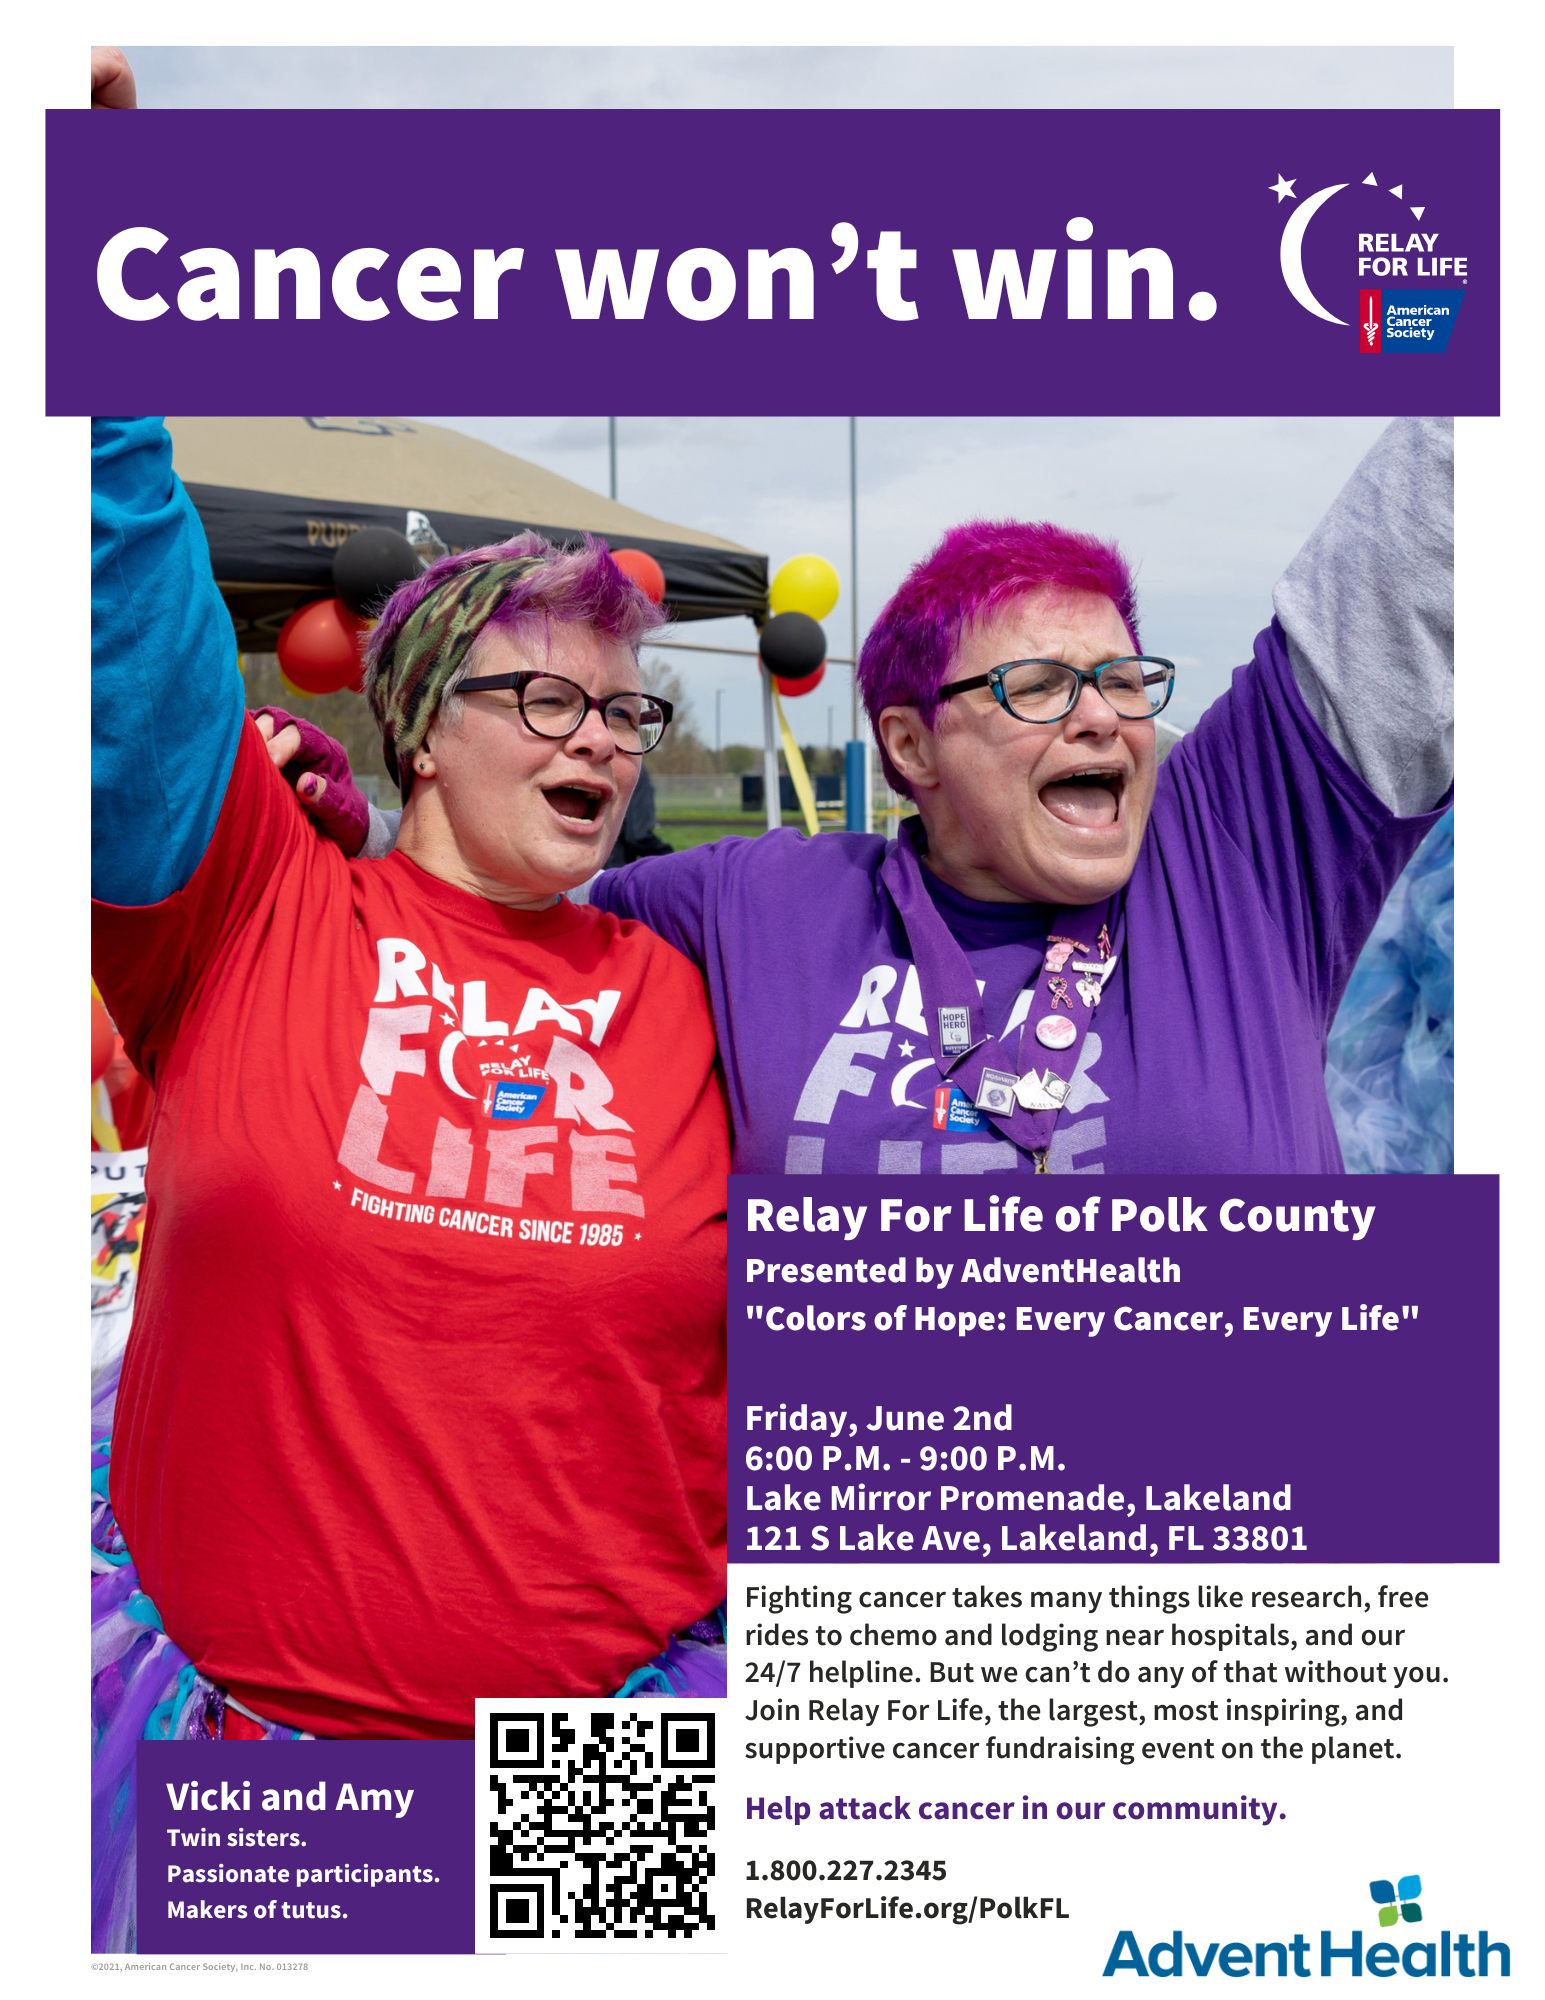 Relay for Life of Polk County is a fundraiser for the American Cancer society. We will have food and entertainment all while raising funds to help cancer patients' services, education advocacy and research. A luminaria ceremony with lighted bags honoring those who are fighting and those we have lost to cancer will start at 8:30 pm.